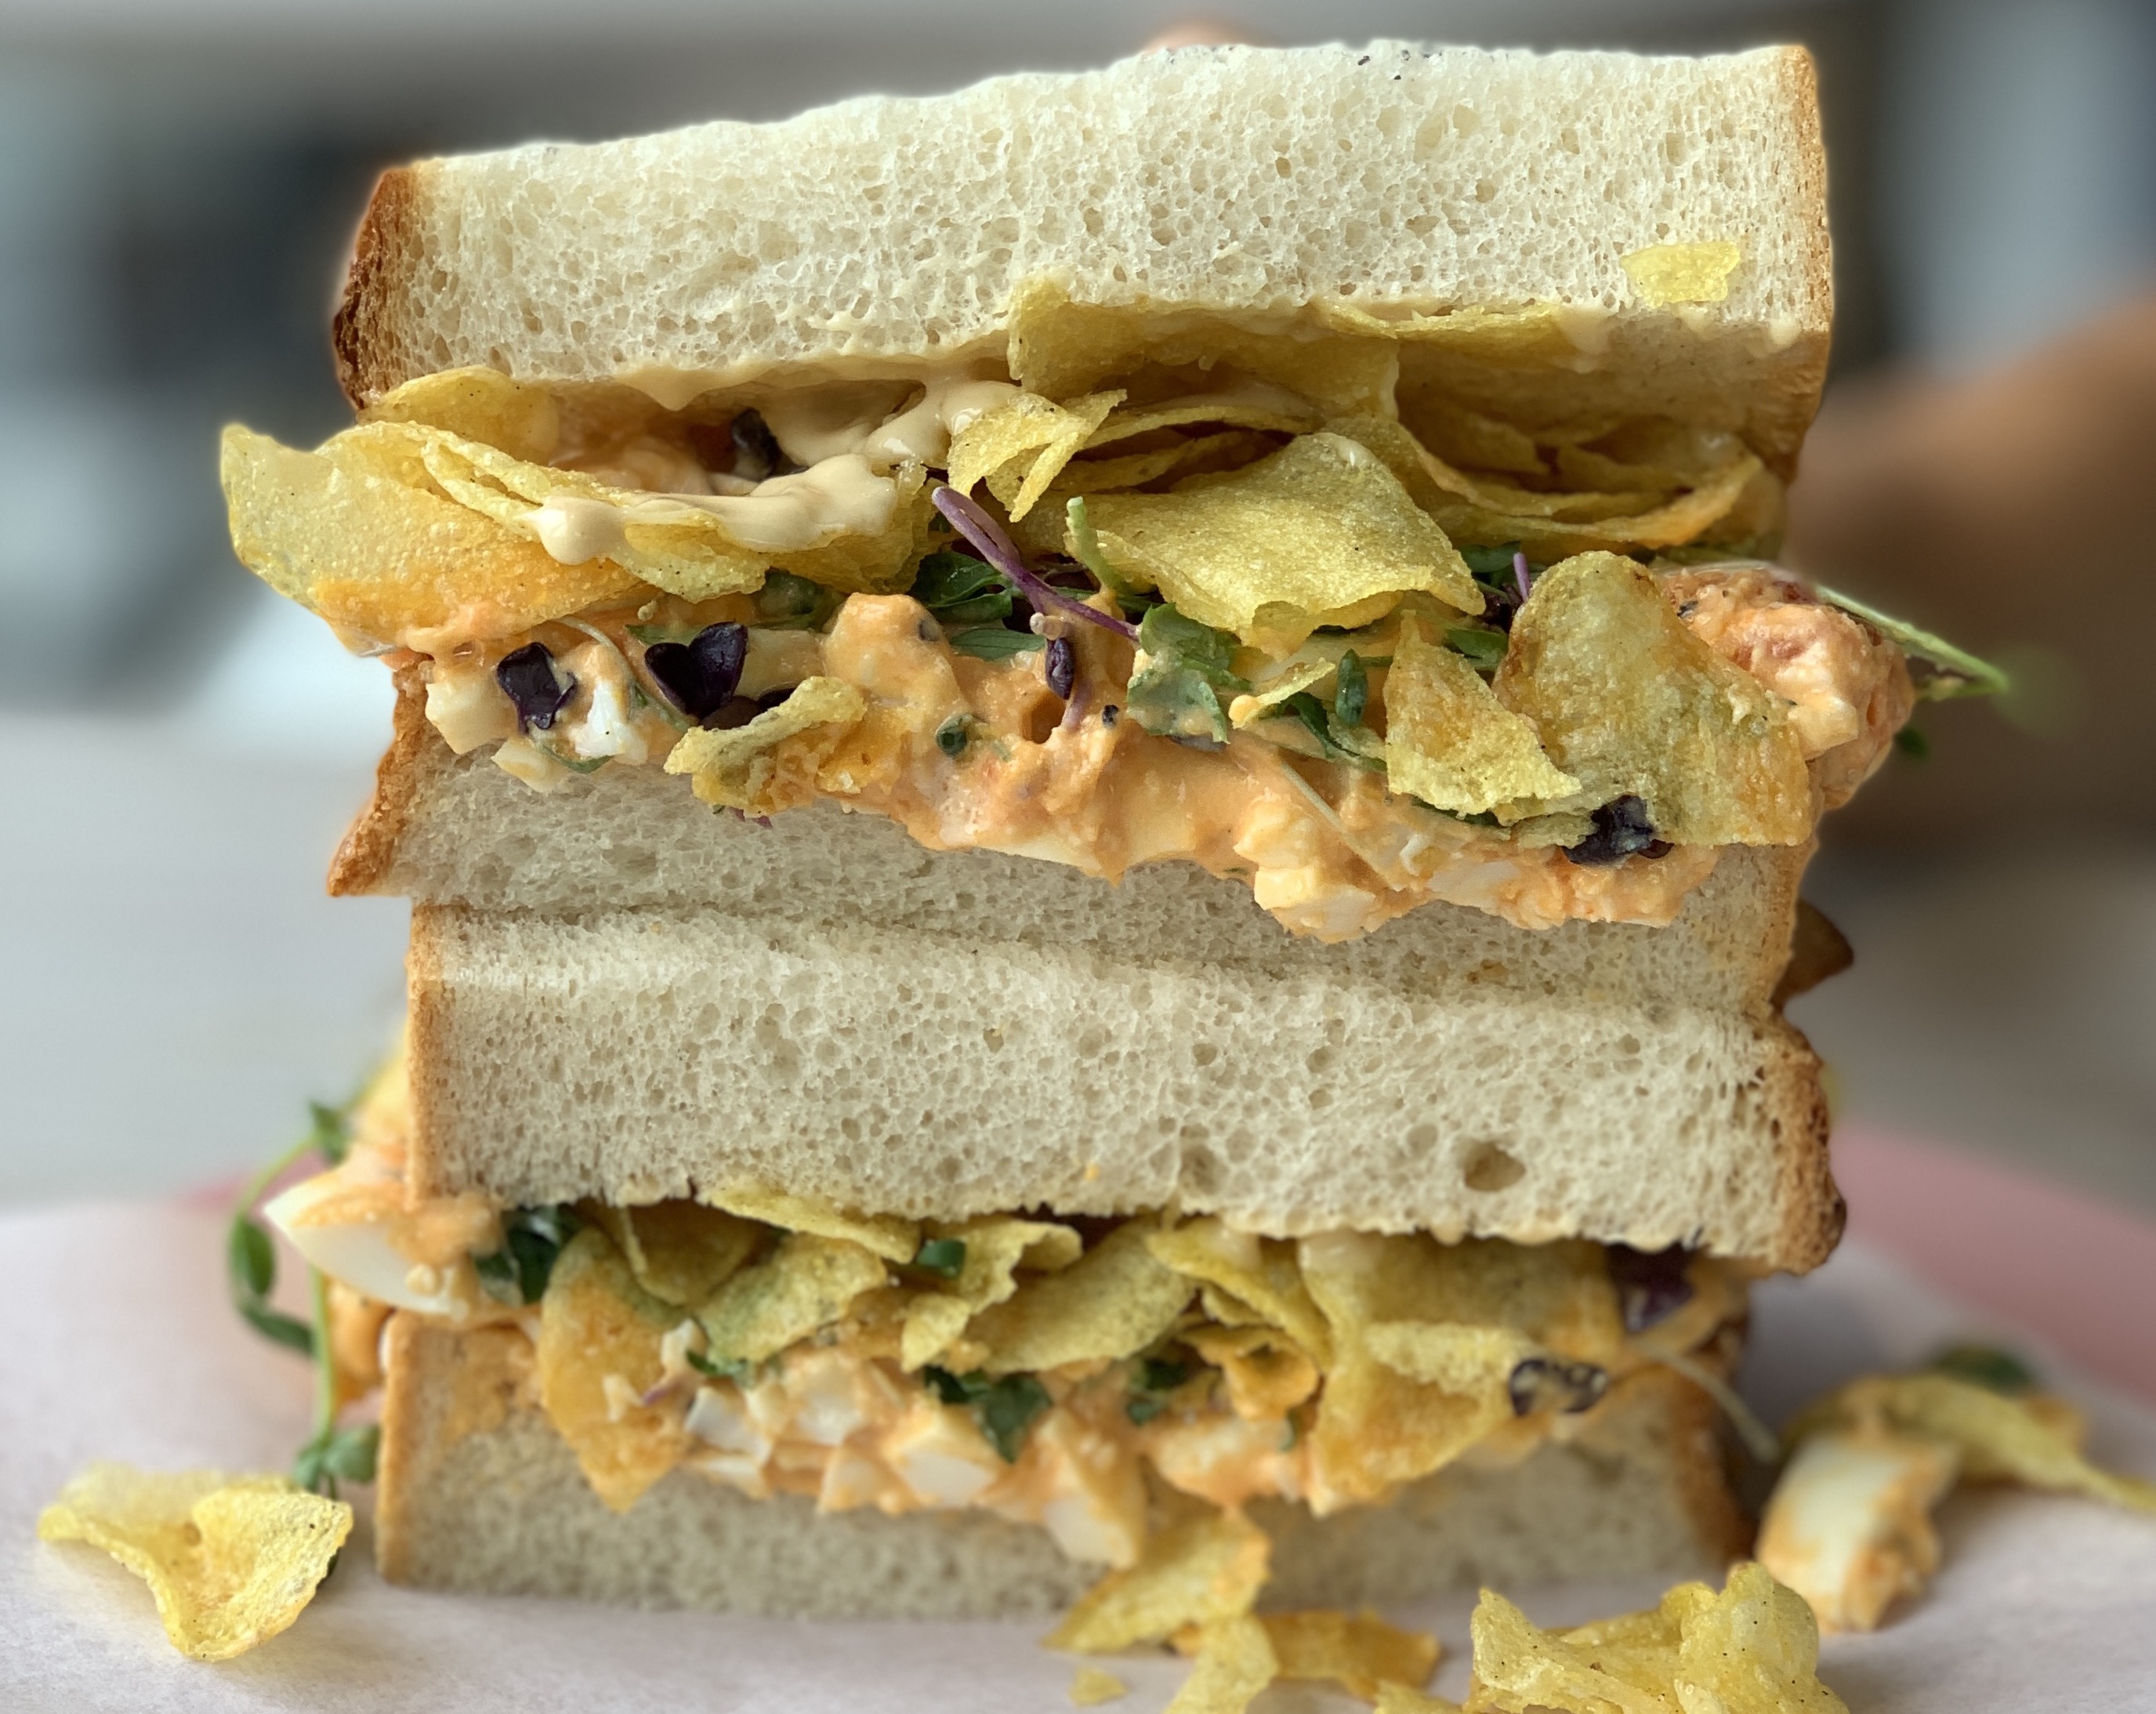 Two sandwiches stacked on top of each other, consisting of white bloomer bread filled with egg mayonnaise and crisps.